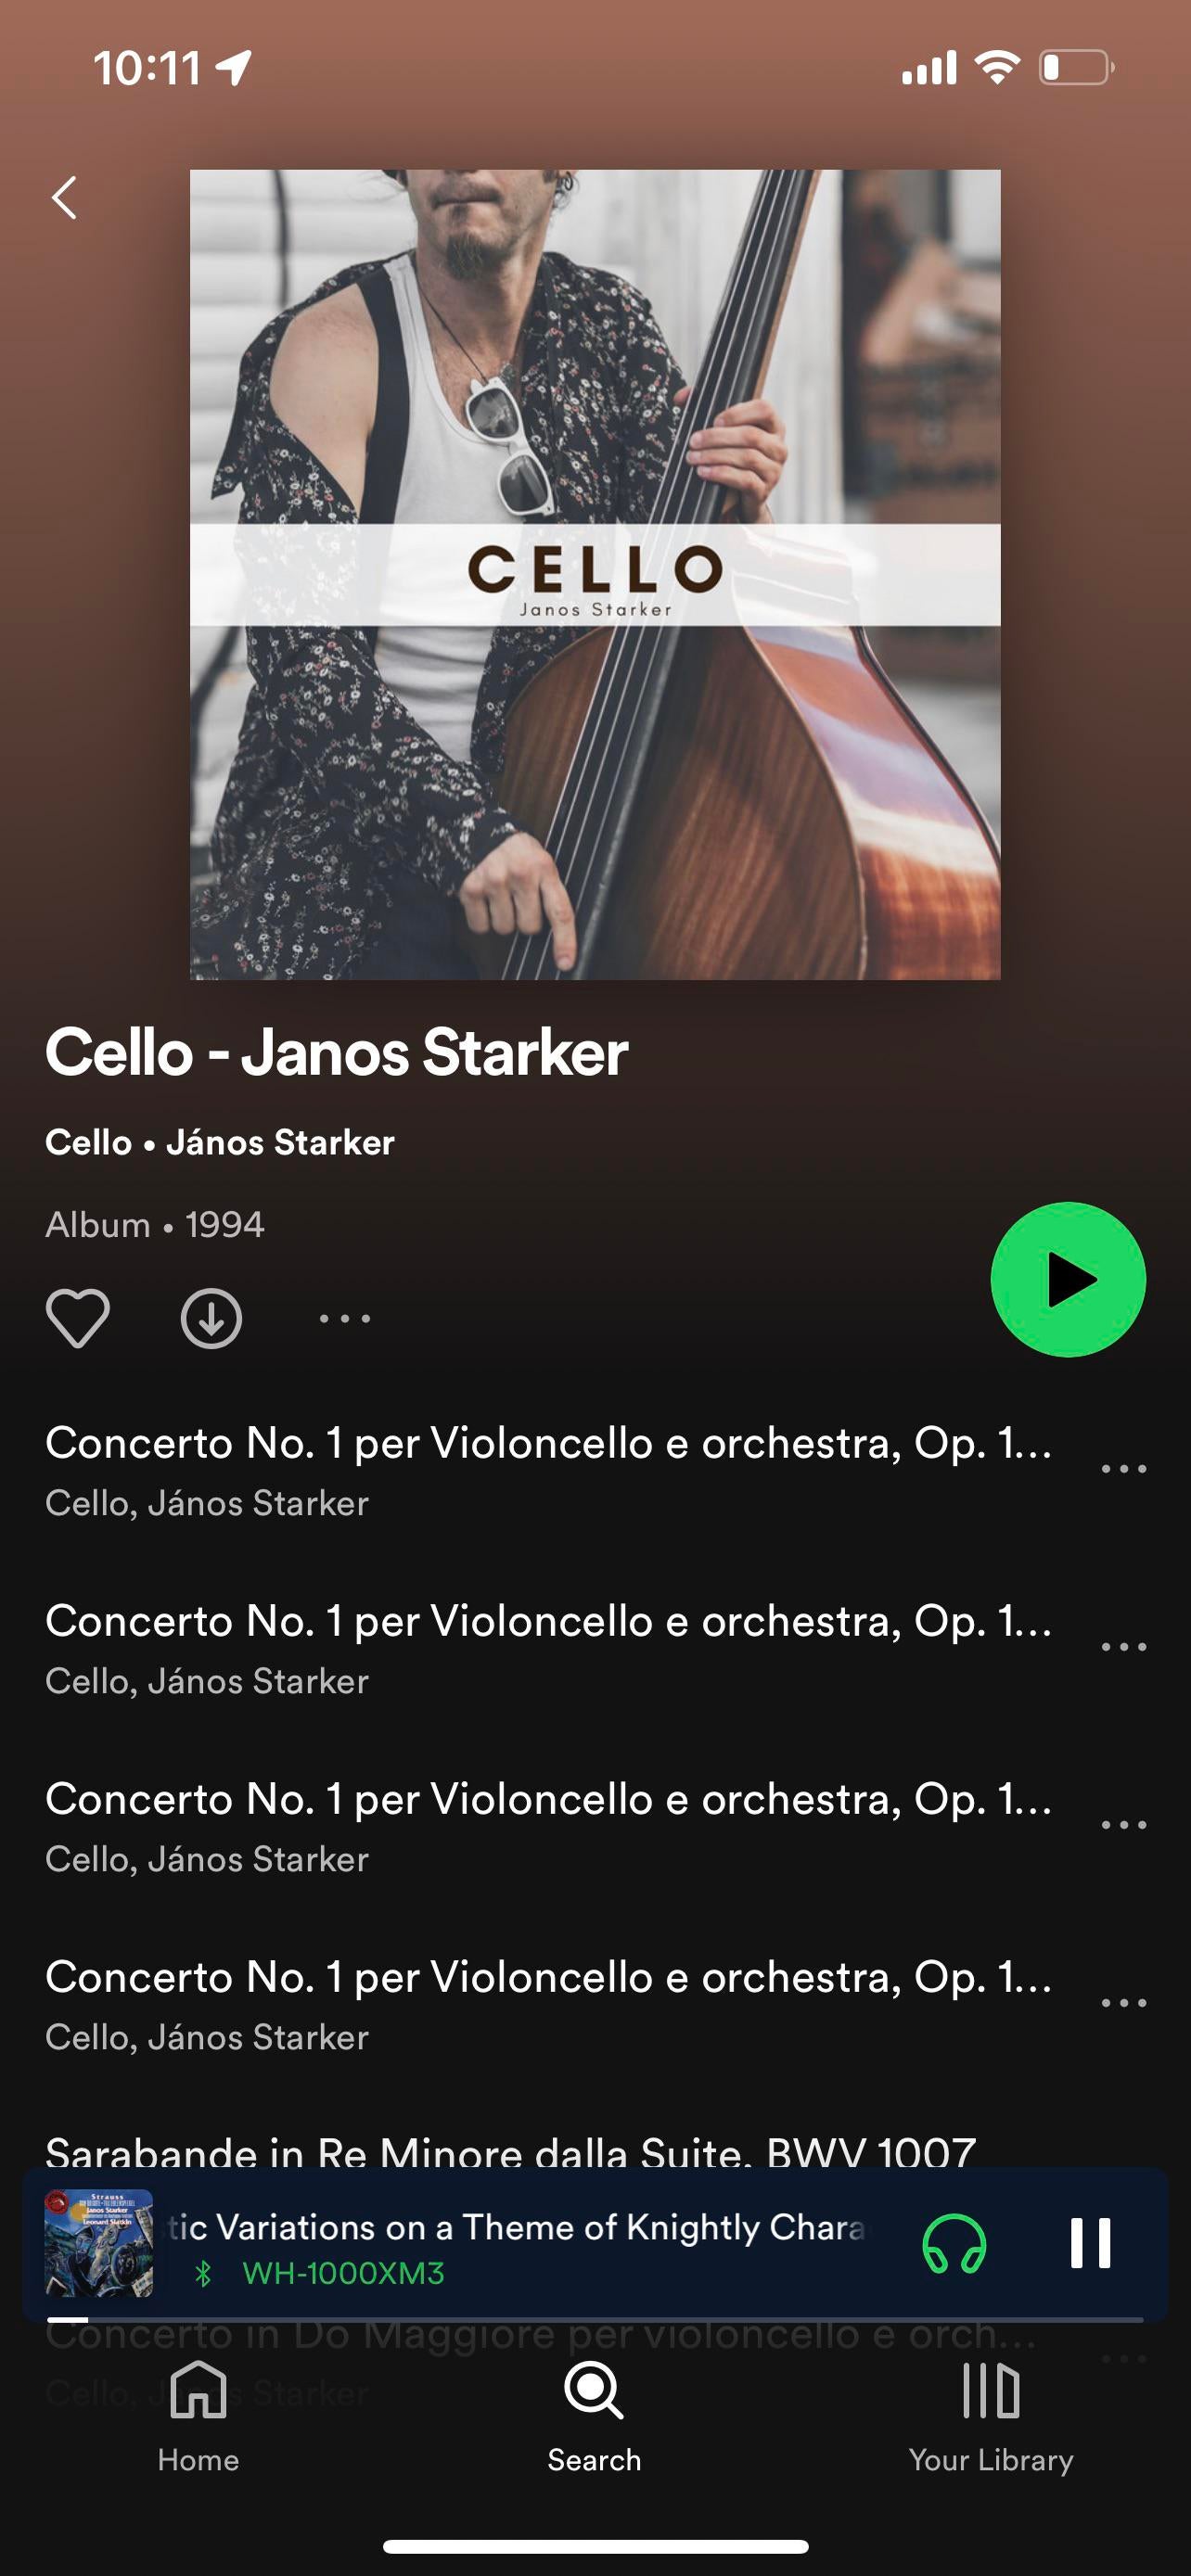 Does anyone know the history behind this album cover of the great janos starker rcello